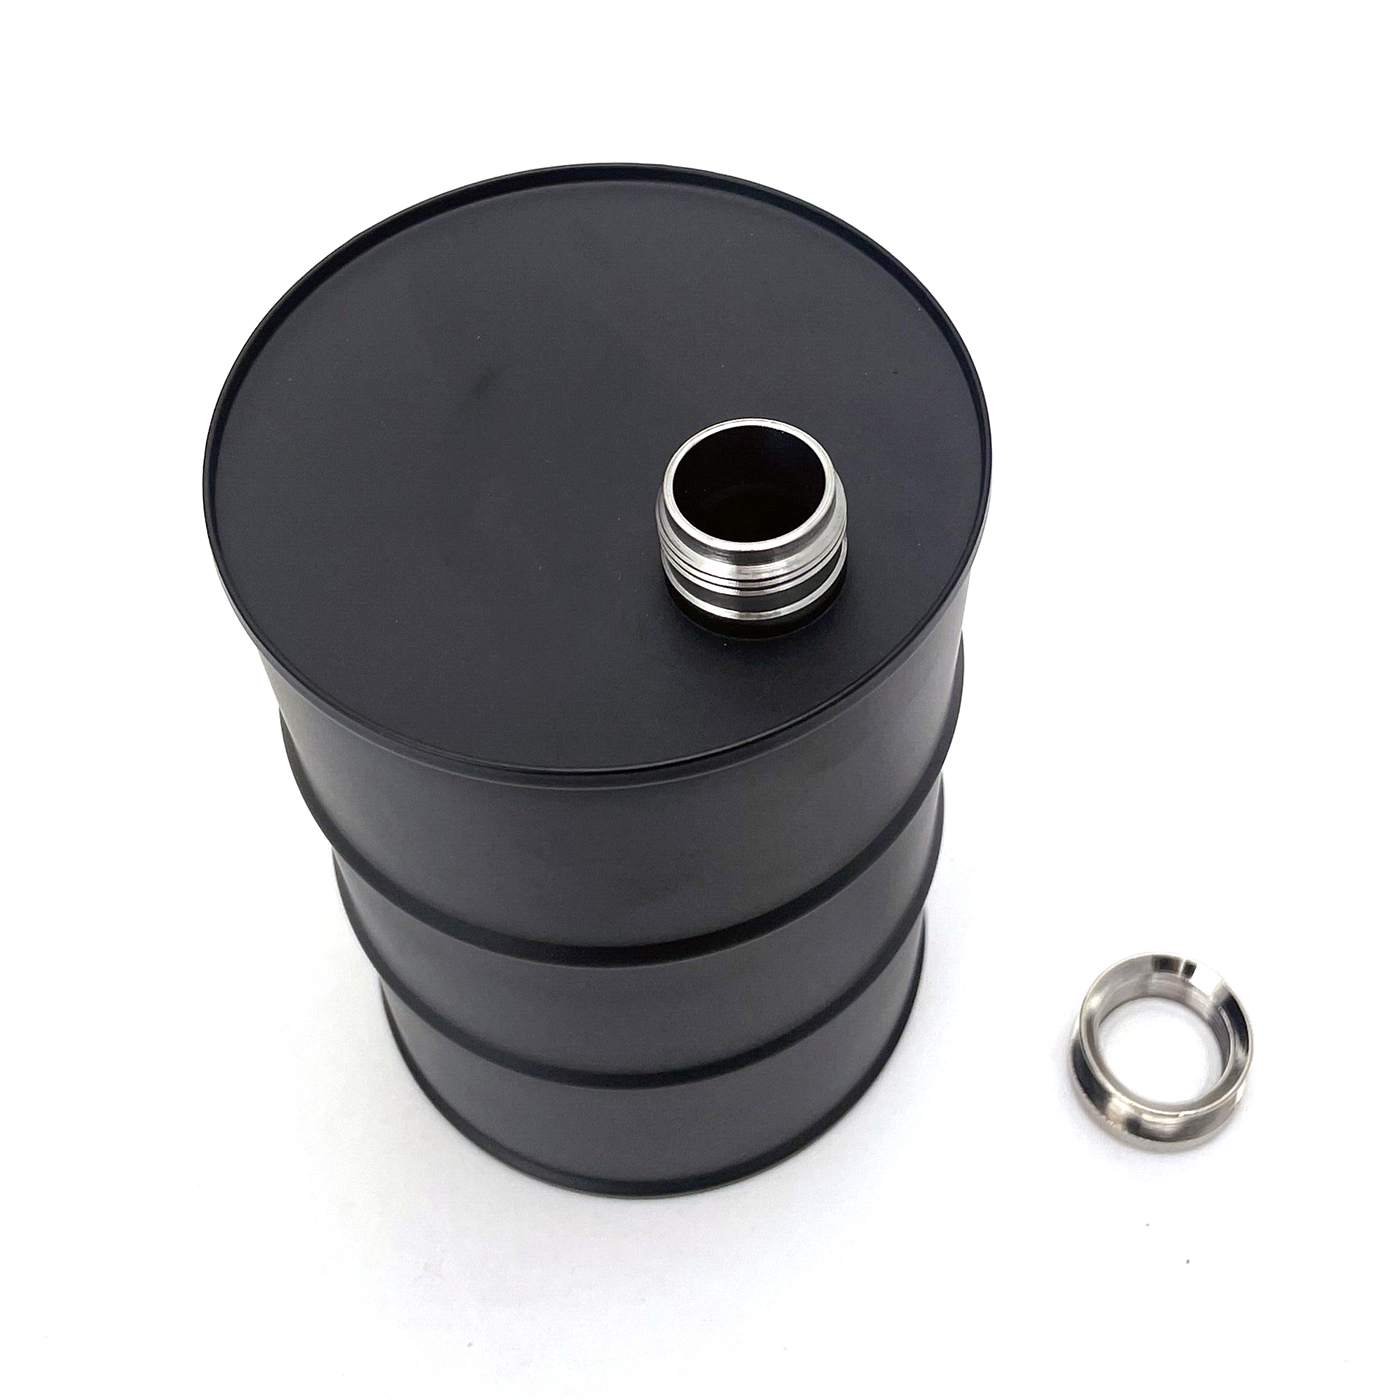 25 oz. Stainless Steel Oil Drum Flask3